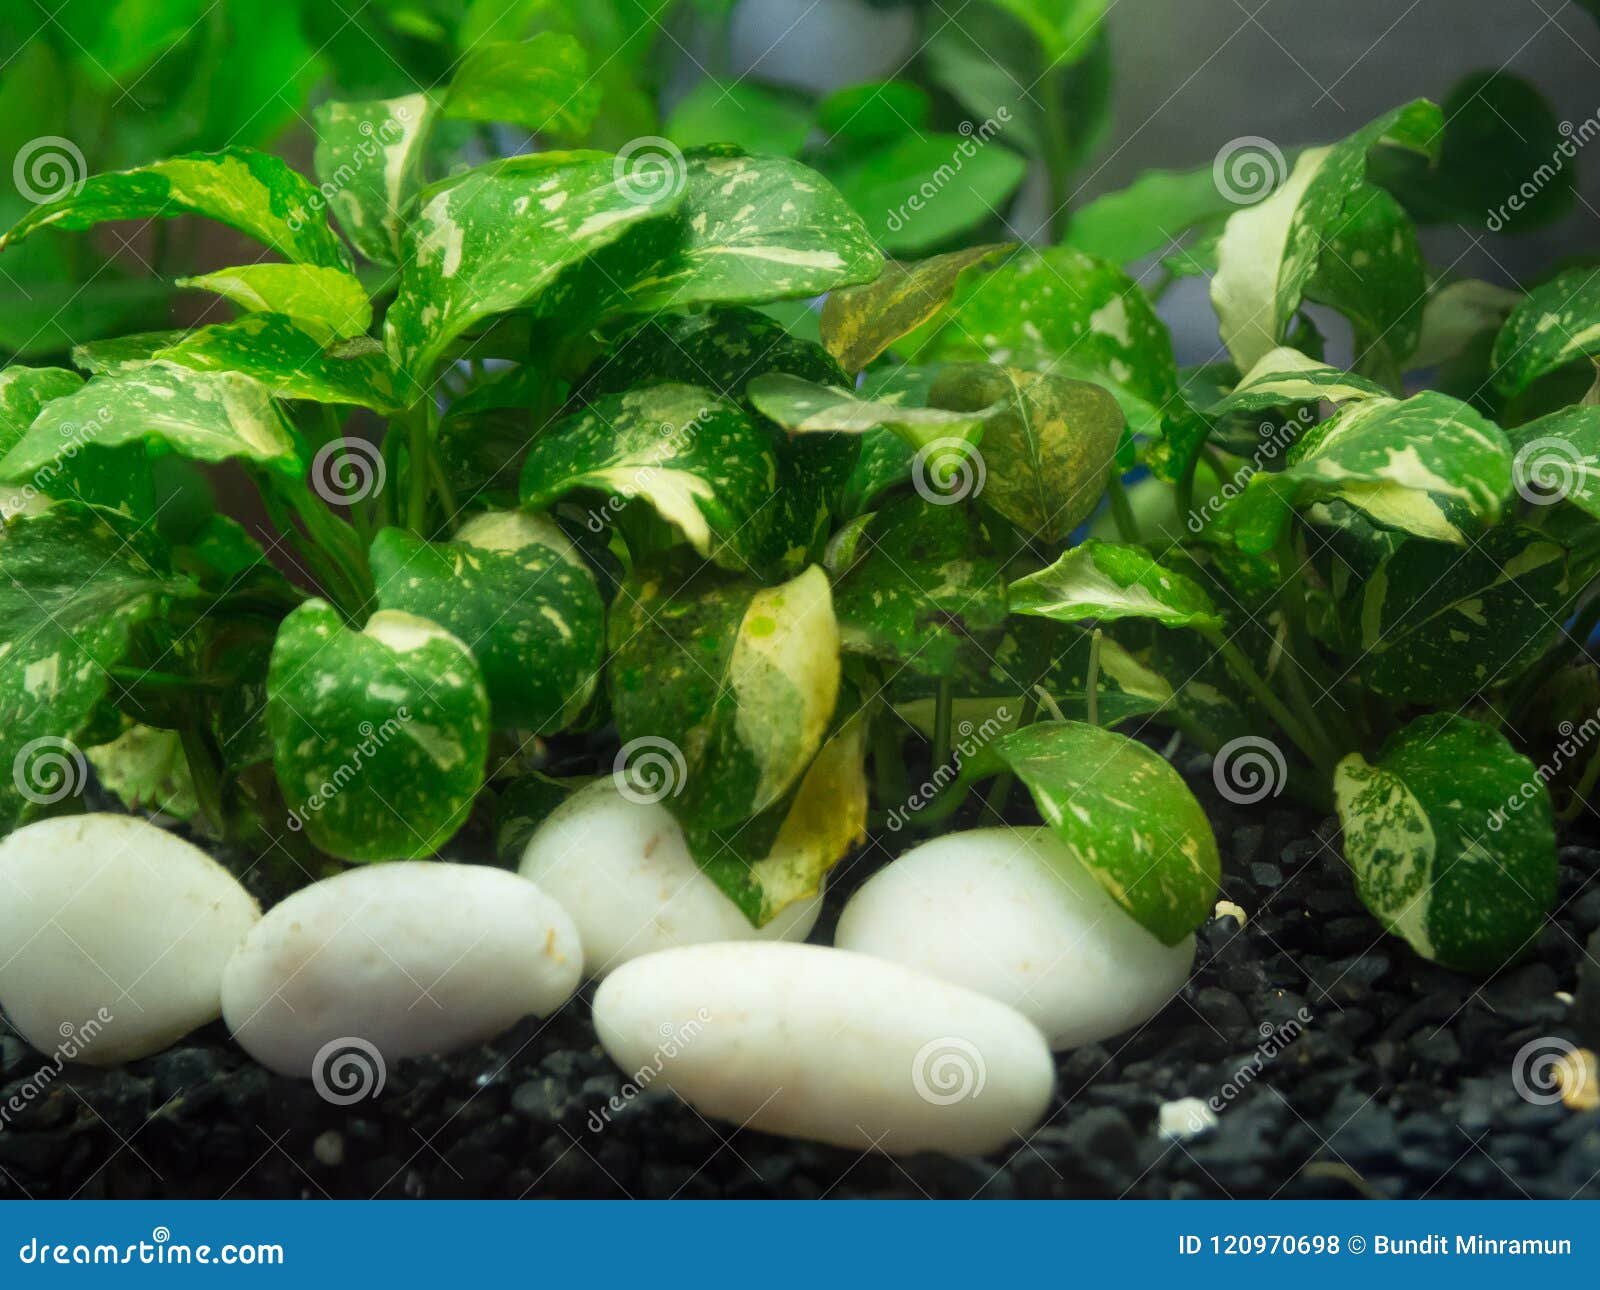 Underwater Green Leaves Plants In A Fish Tank For Decoration